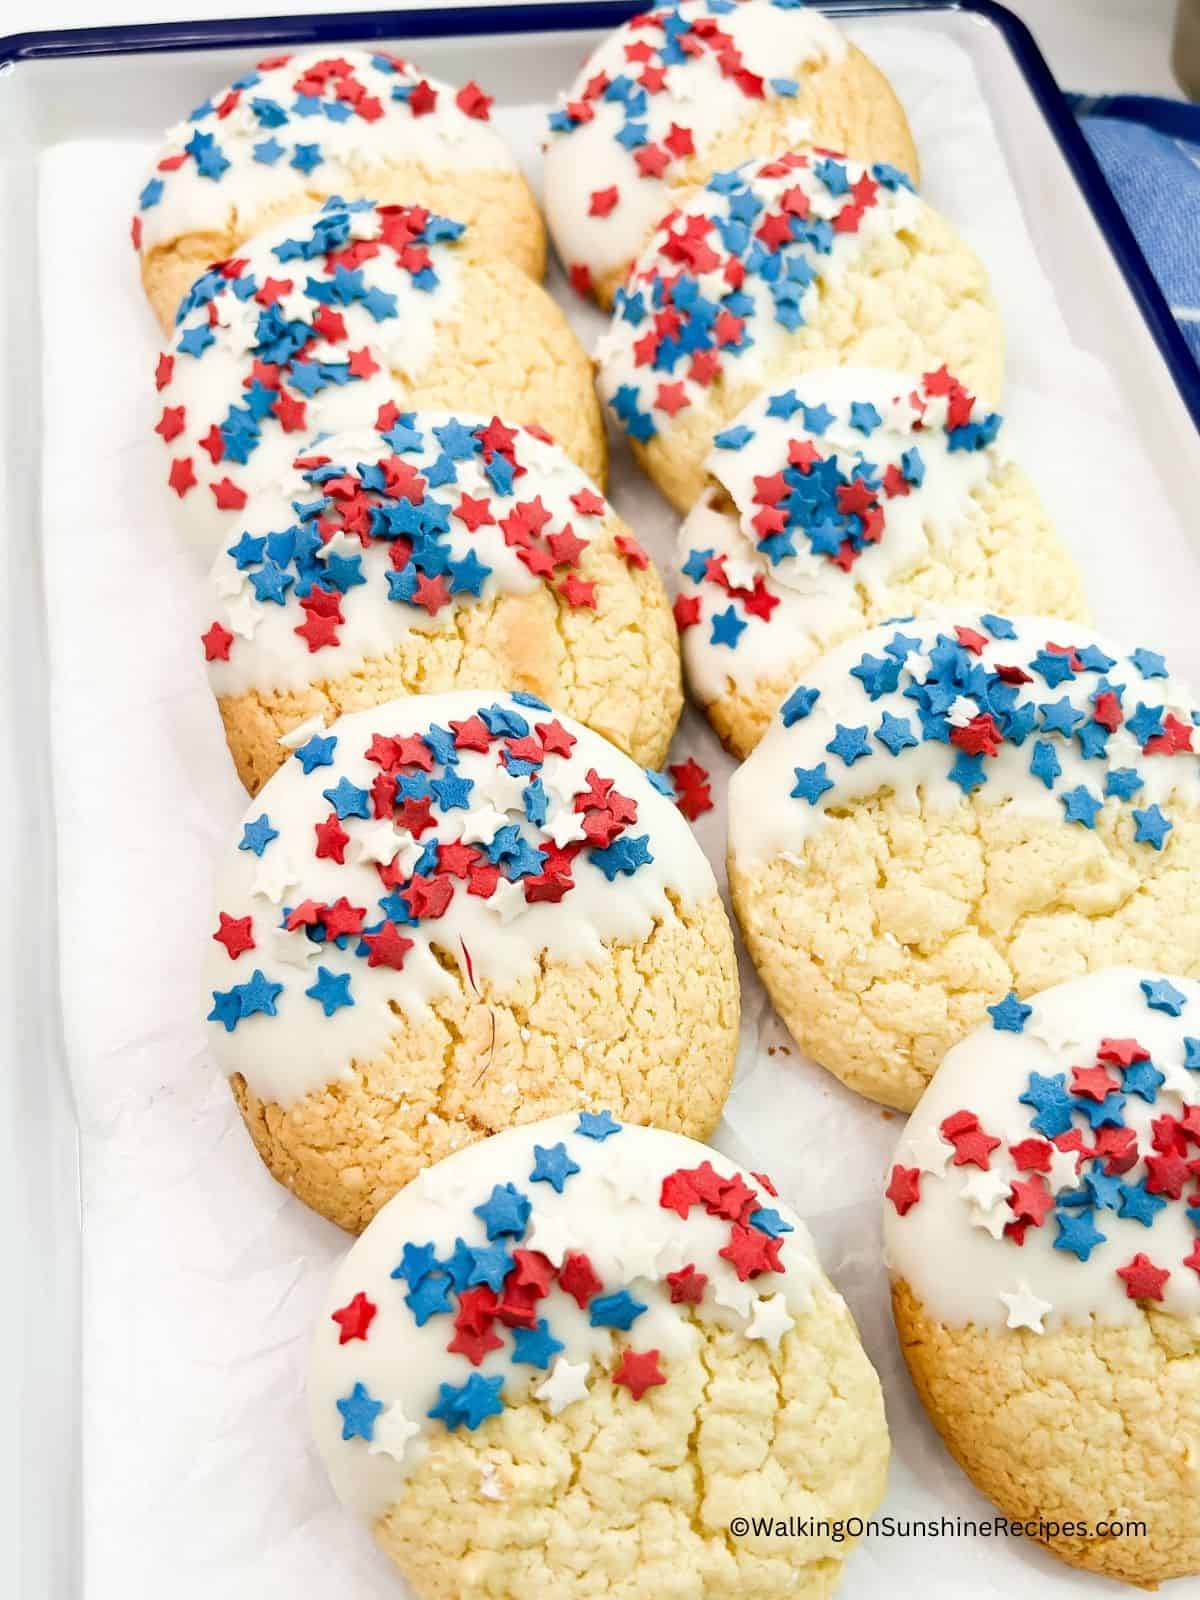 4th of July Cake Mix Cookies dipped in white chocolate and patriotic sprinkles on the chocolate.